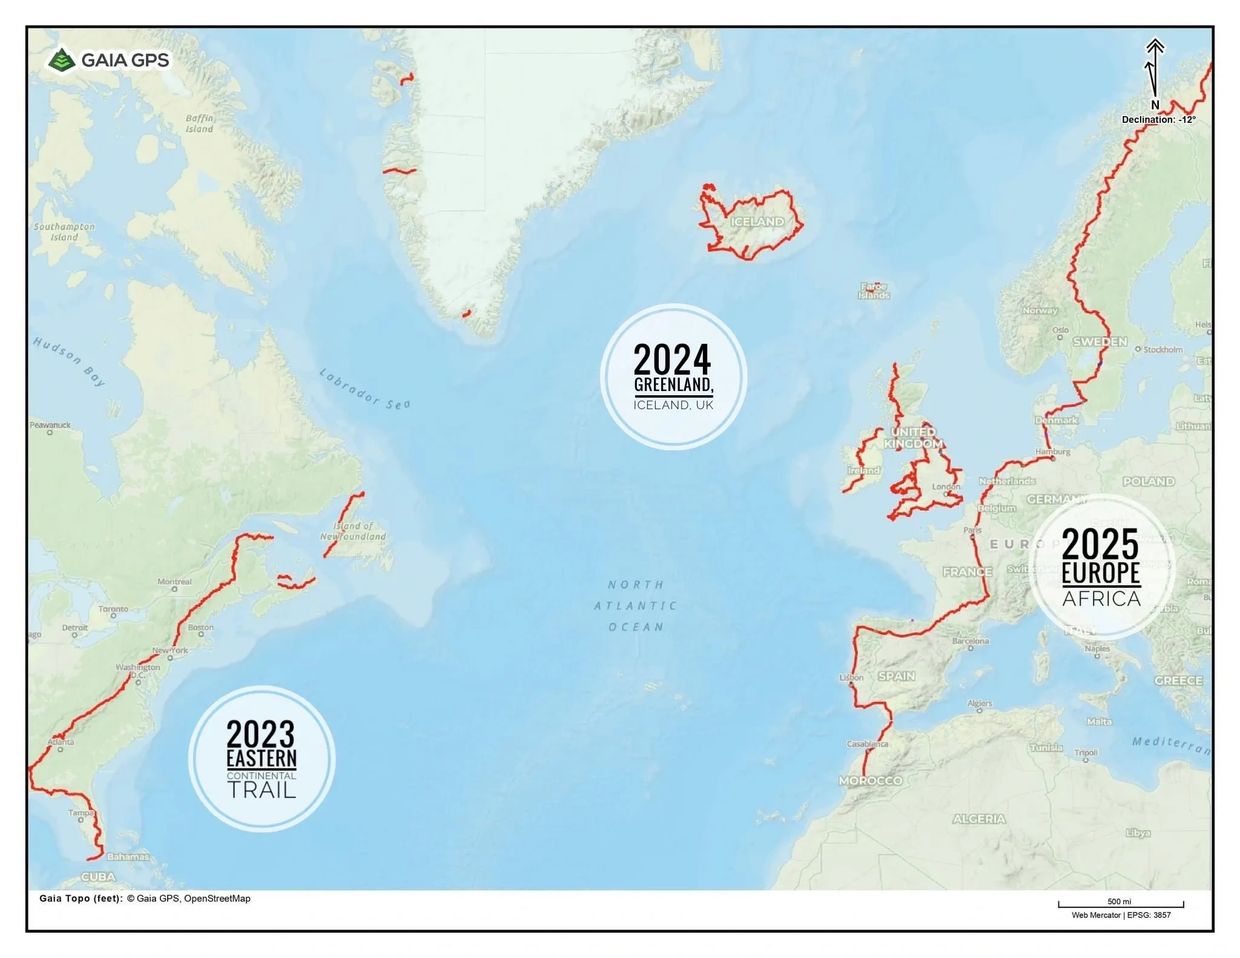 Pangea Traverse map with years 2023, 2024 and 2025. 